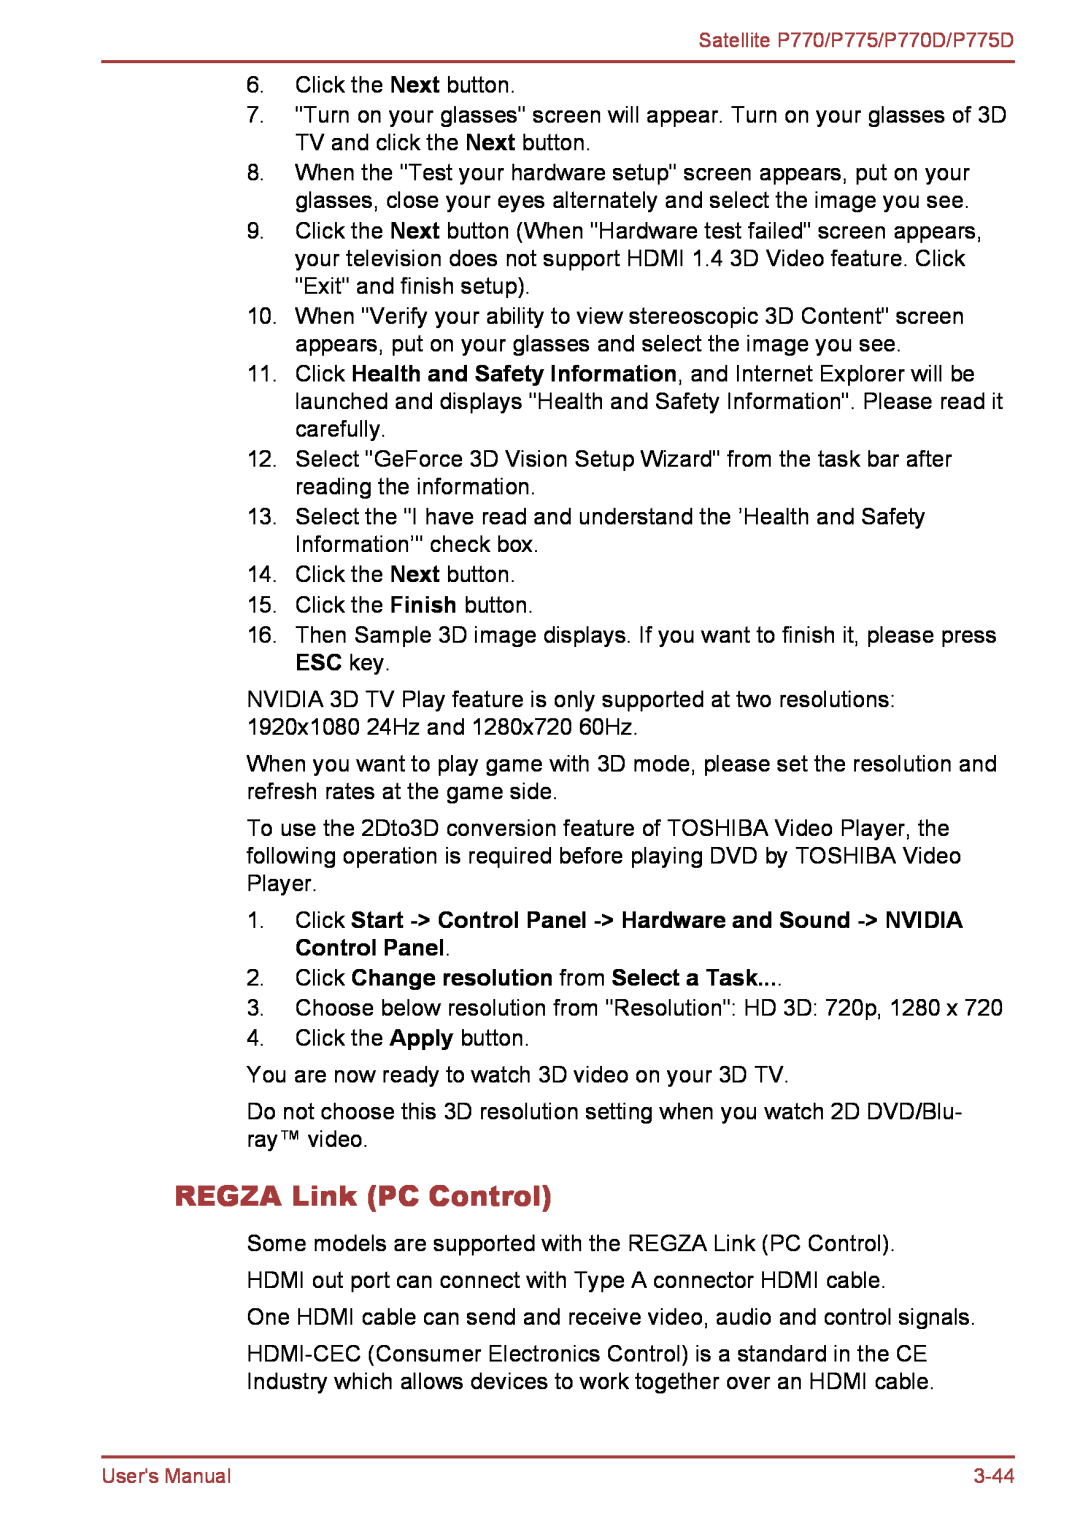 Toshiba P770 user manual REGZA Link PC Control, Click Change resolution from Select a Task 